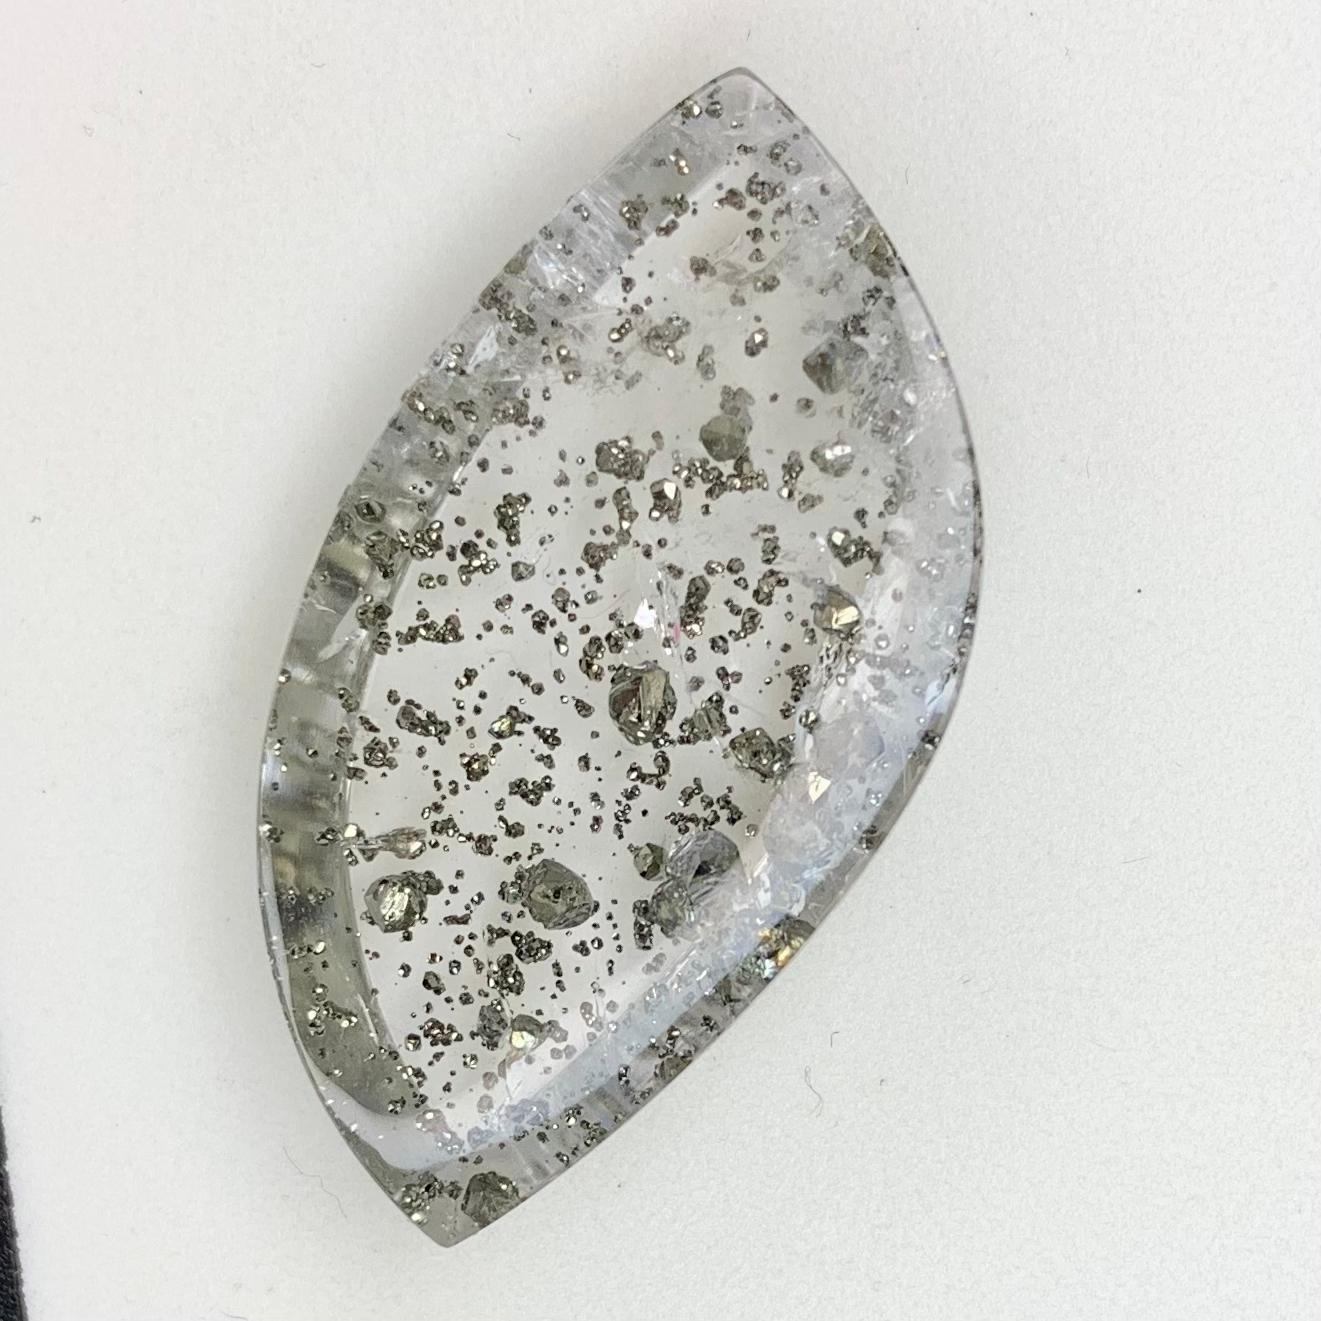 Meet Galaxy! 
A sliver of crystalized space is captured in this spectacular pyrite in quartz gemstone. This amazing piece of quartz was selected from a wonderful vendor (93-year-old Max Davis in California) for it's unique pyrite inclusions, which